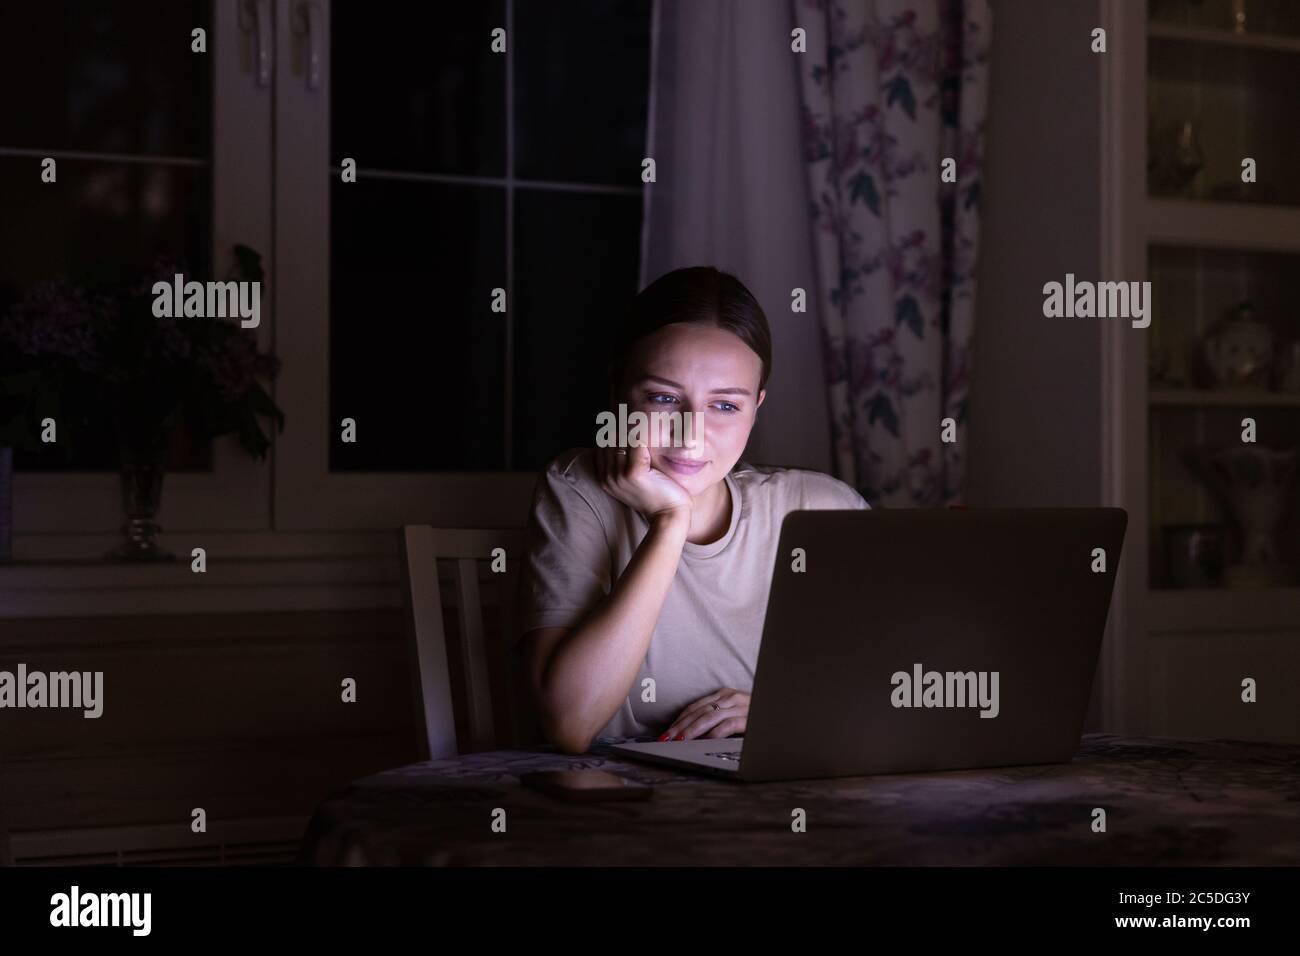 Woman sitting on the table, watching a movie on laptop late at night at home, sharing social media. Stock Photo